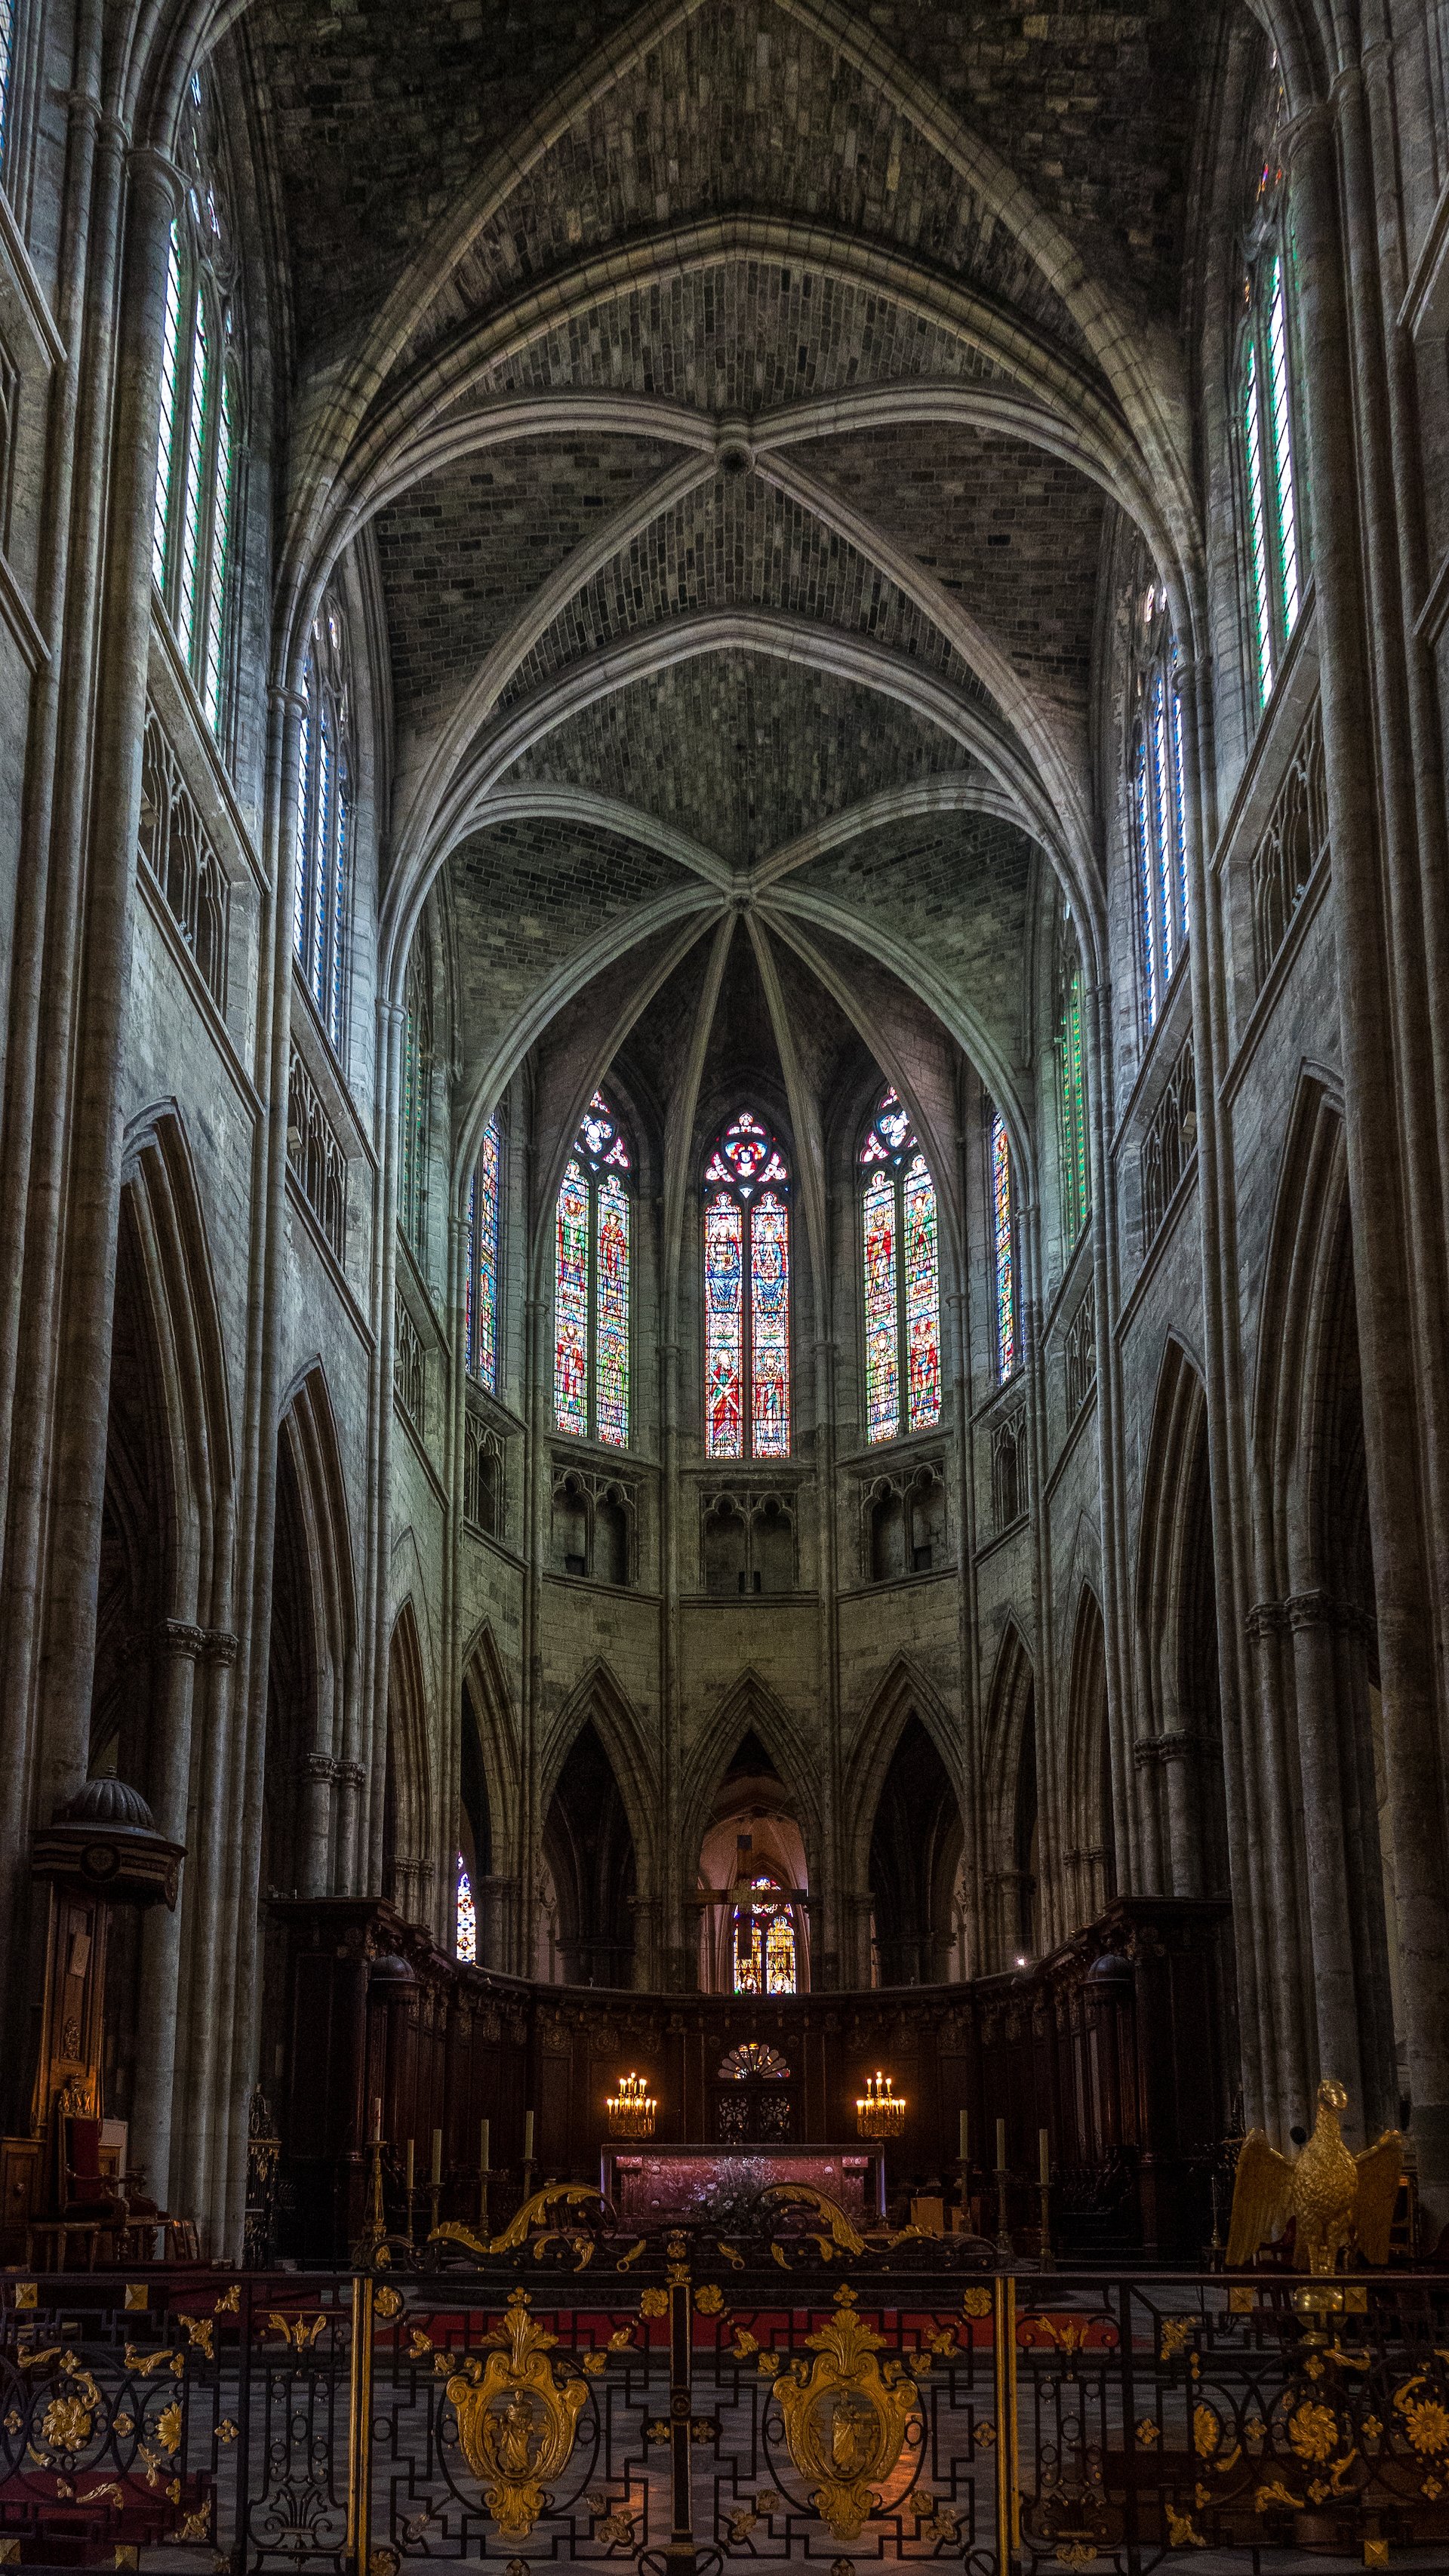  The gothic glory of the interior.  